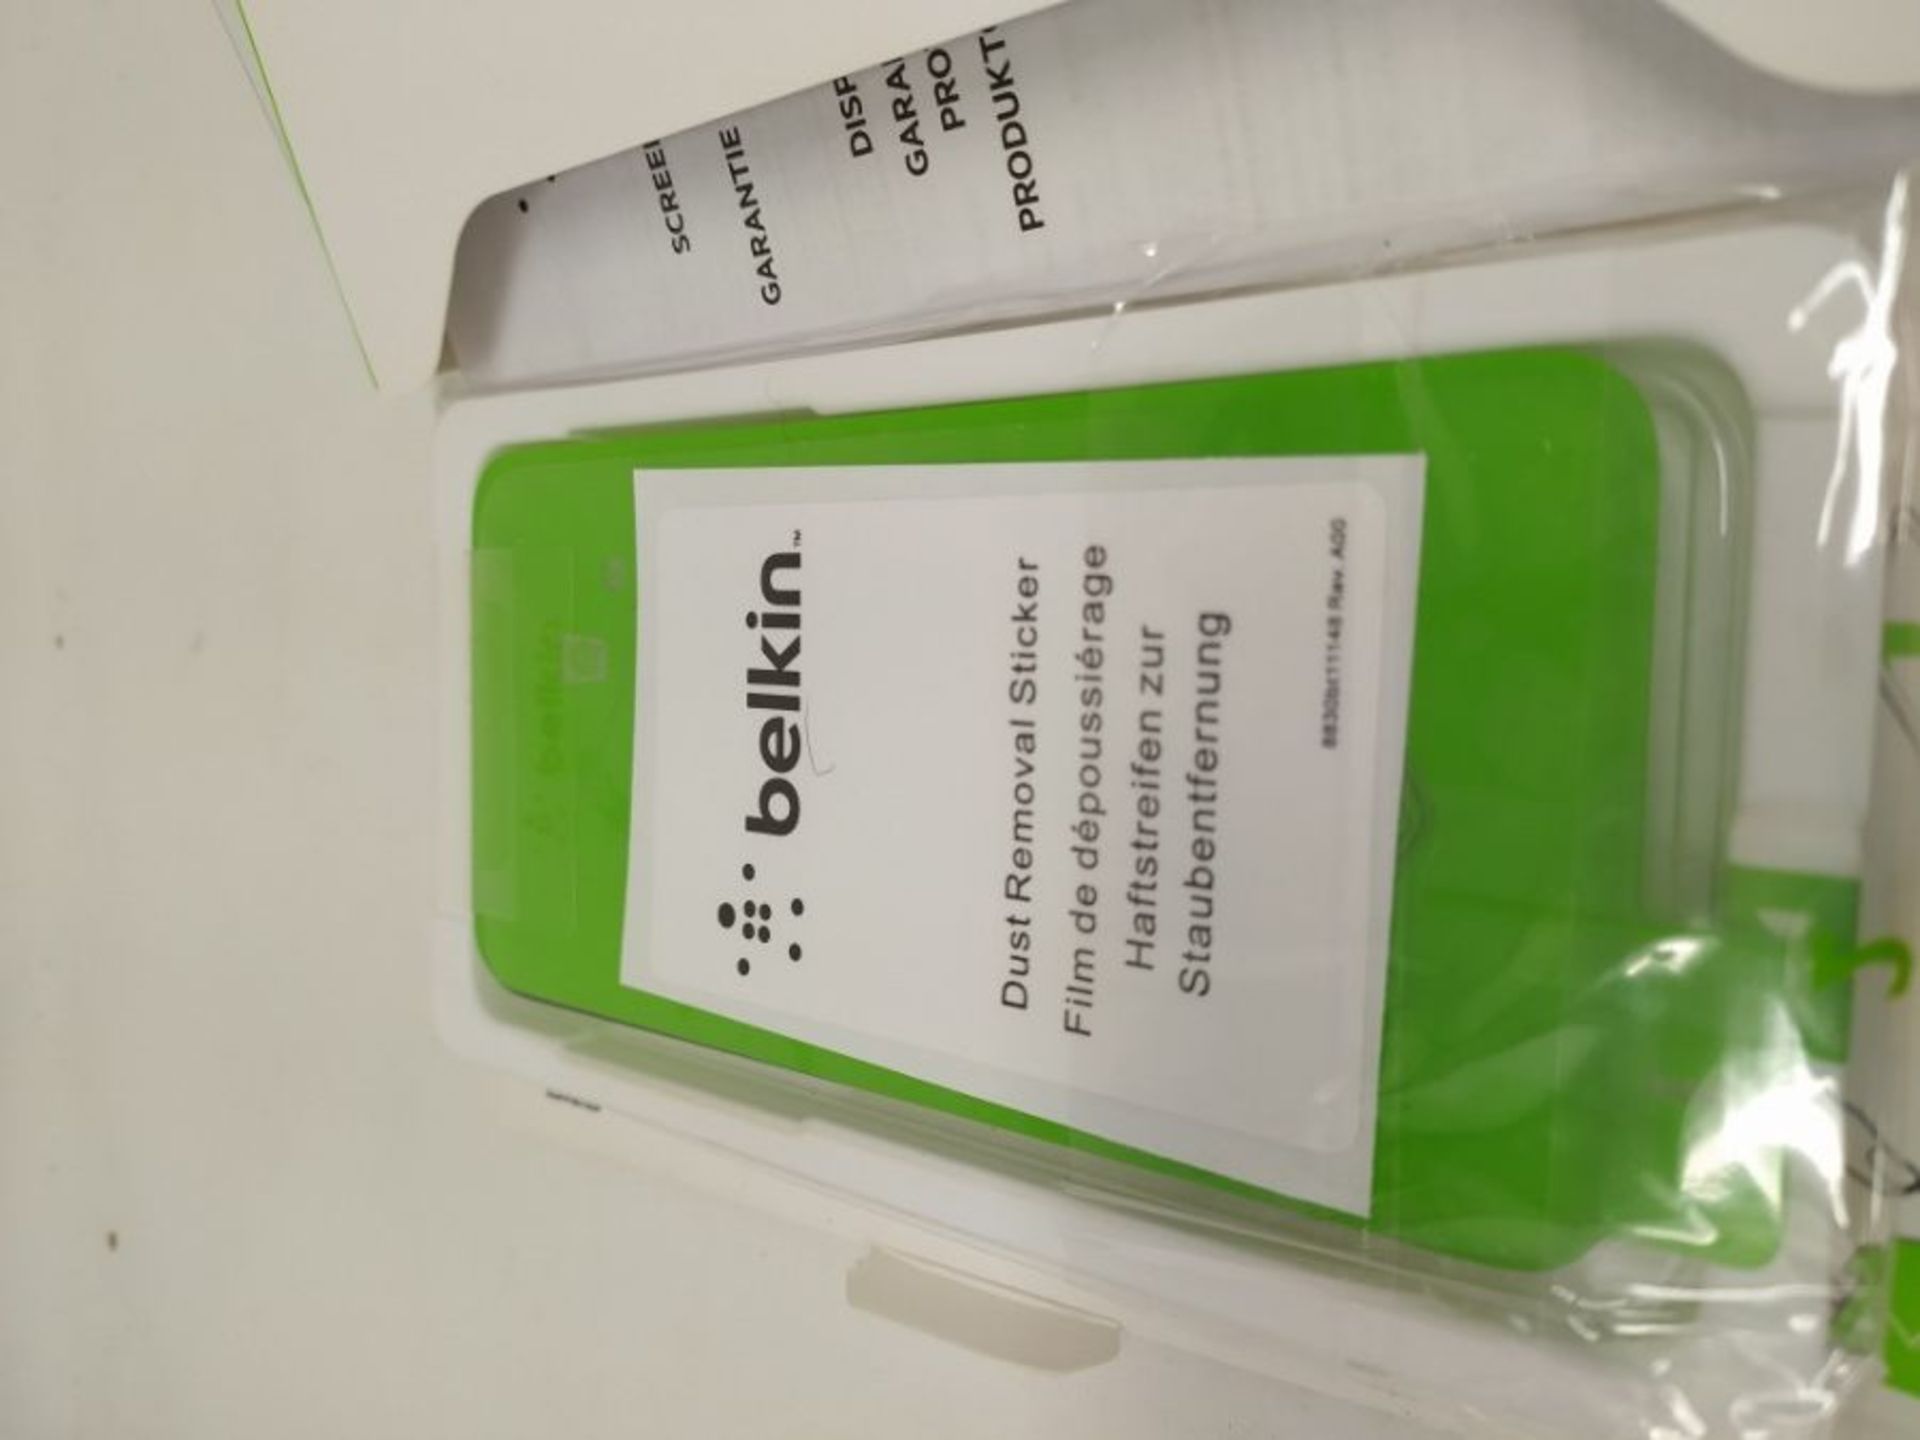 Belkin InvisiGlass UltraCurve Screen Protector for iPhone 11 Pro Screen Protector, iPh - Image 2 of 2